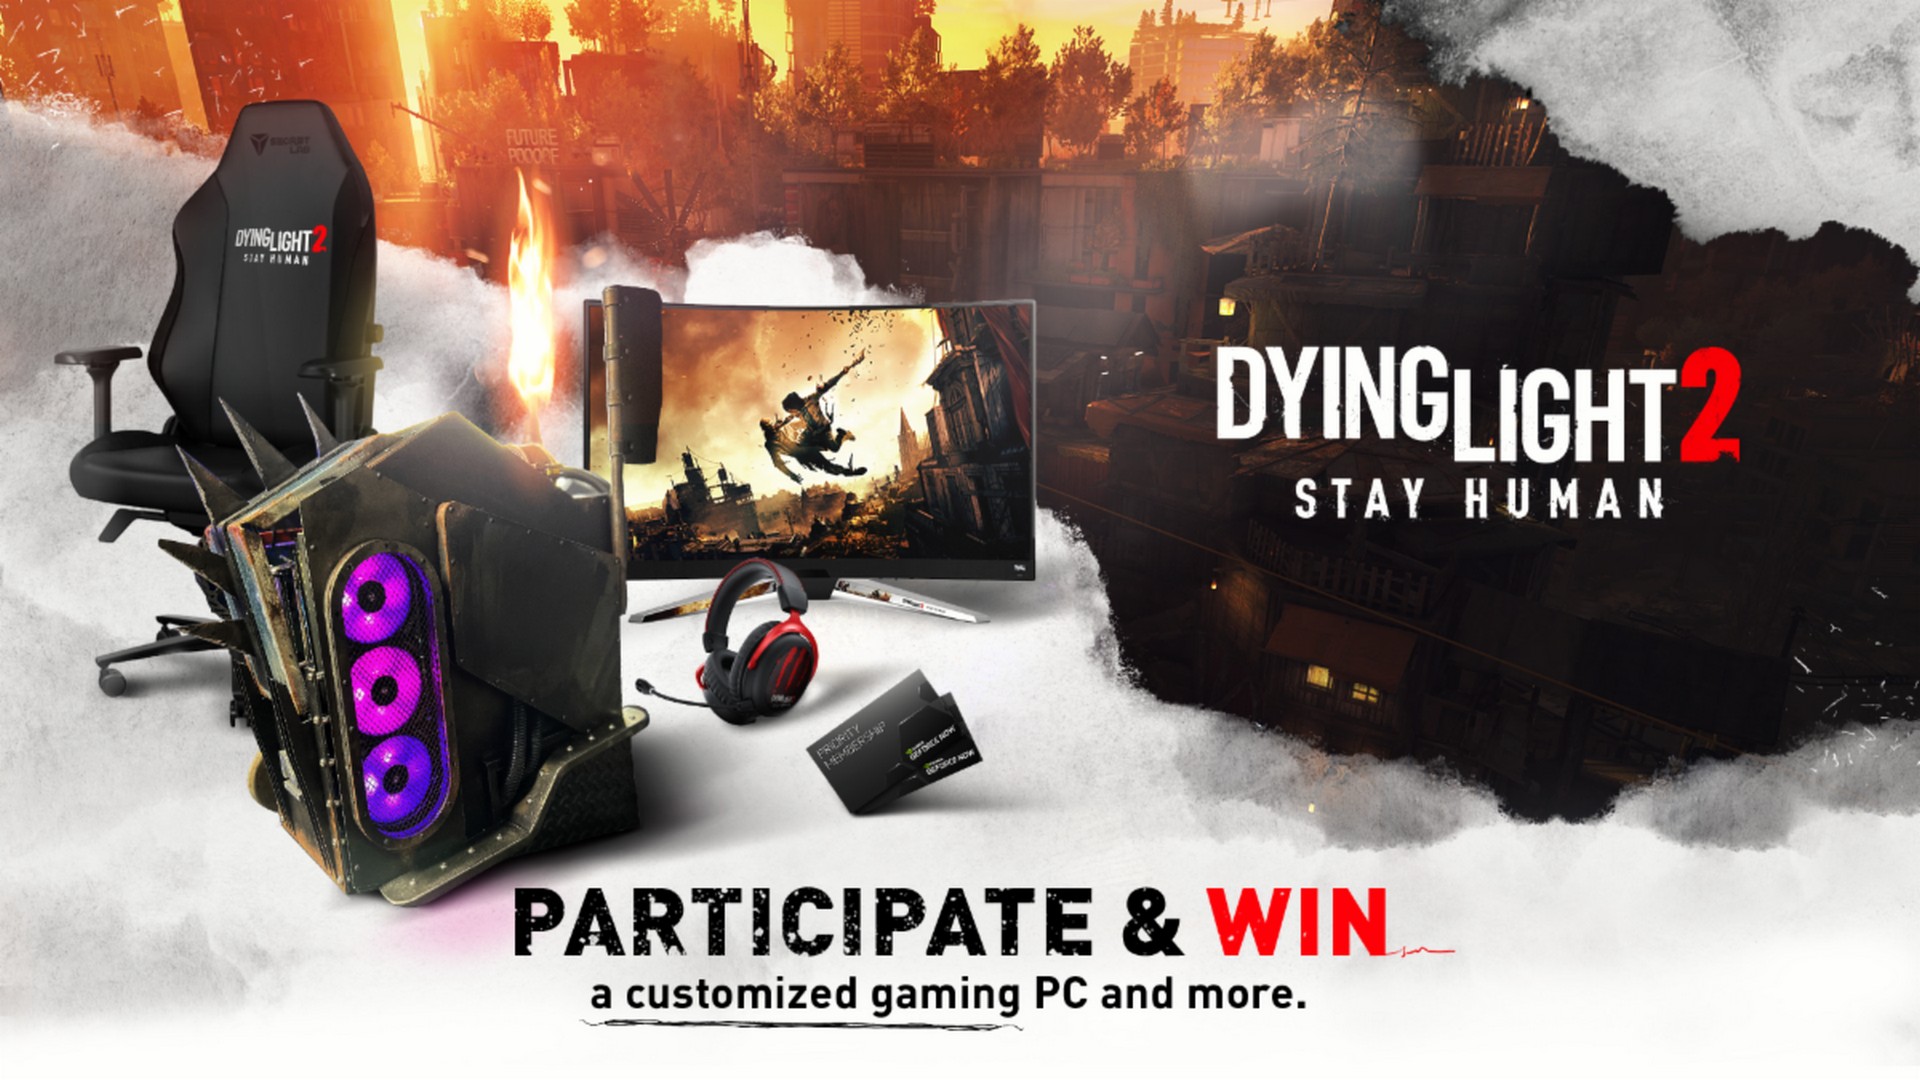 Dying Light 2 Stay Human Contest – Win Dope Prizes